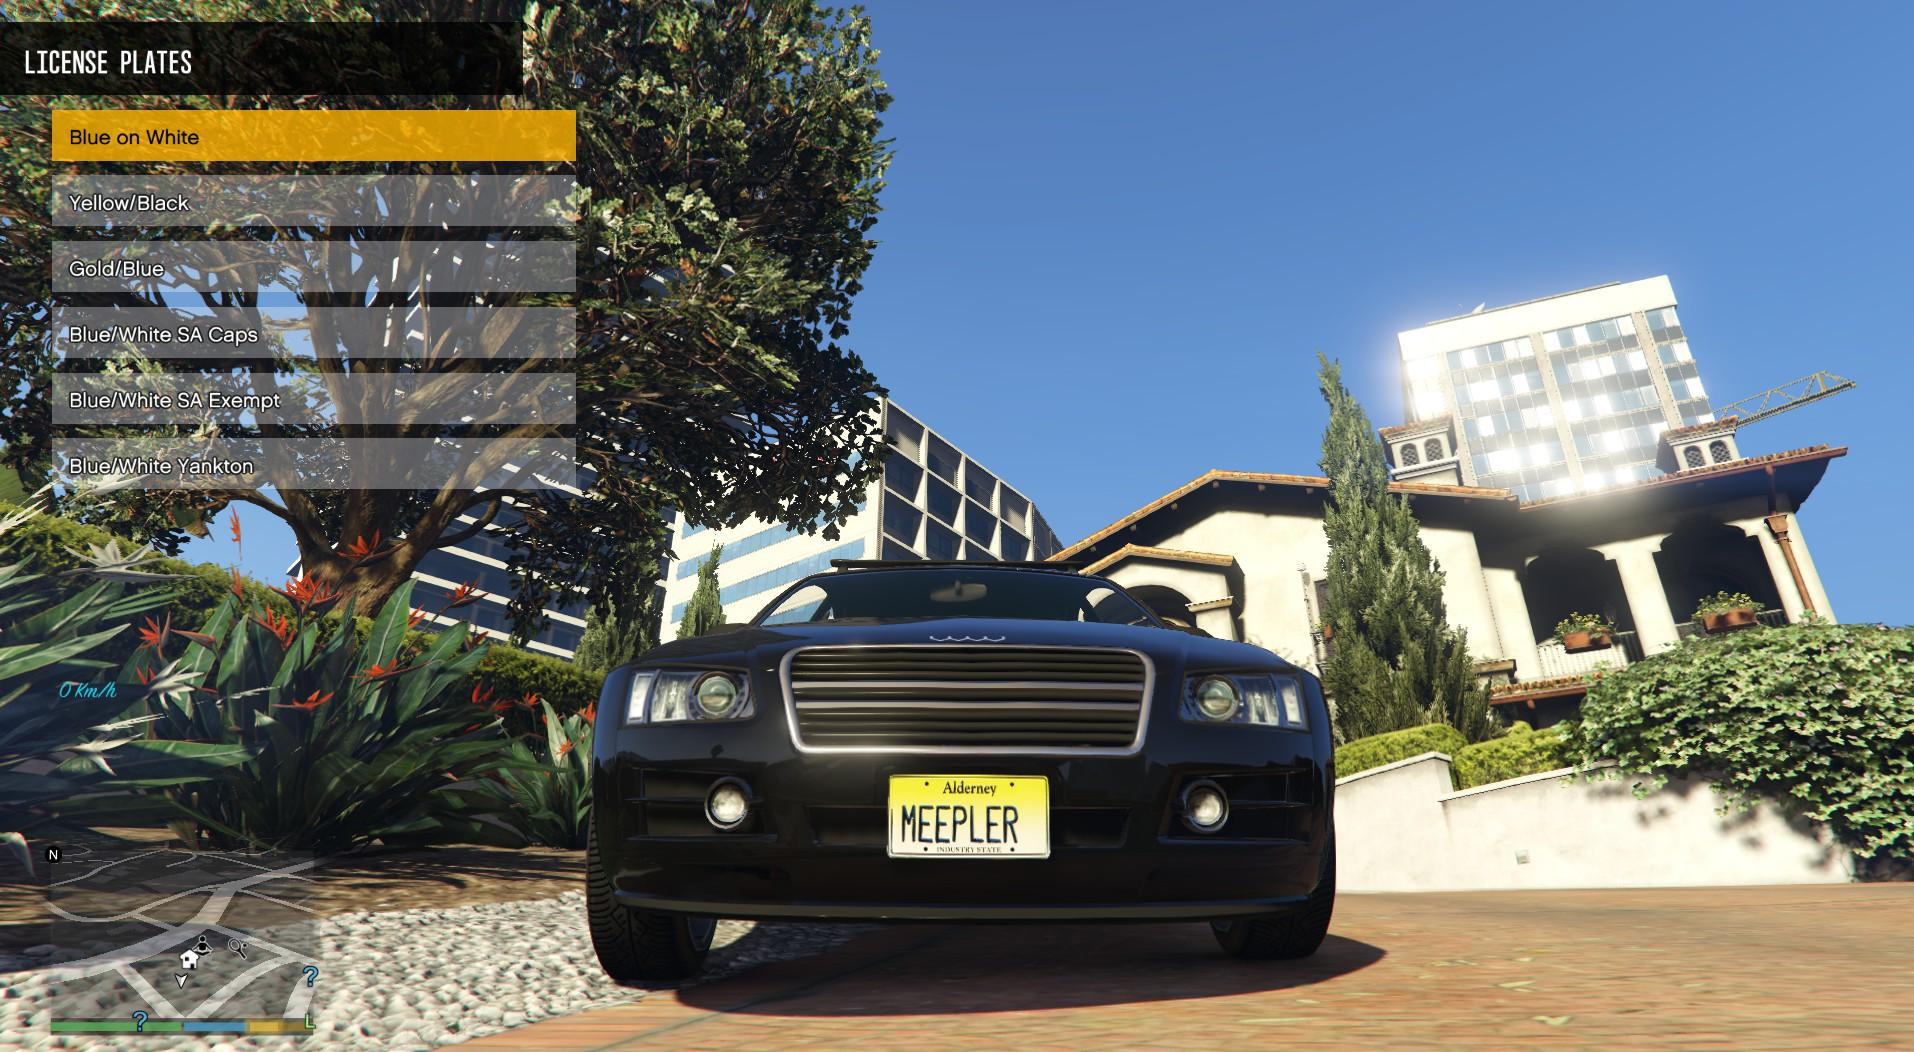 gta online custom license plate not showing up